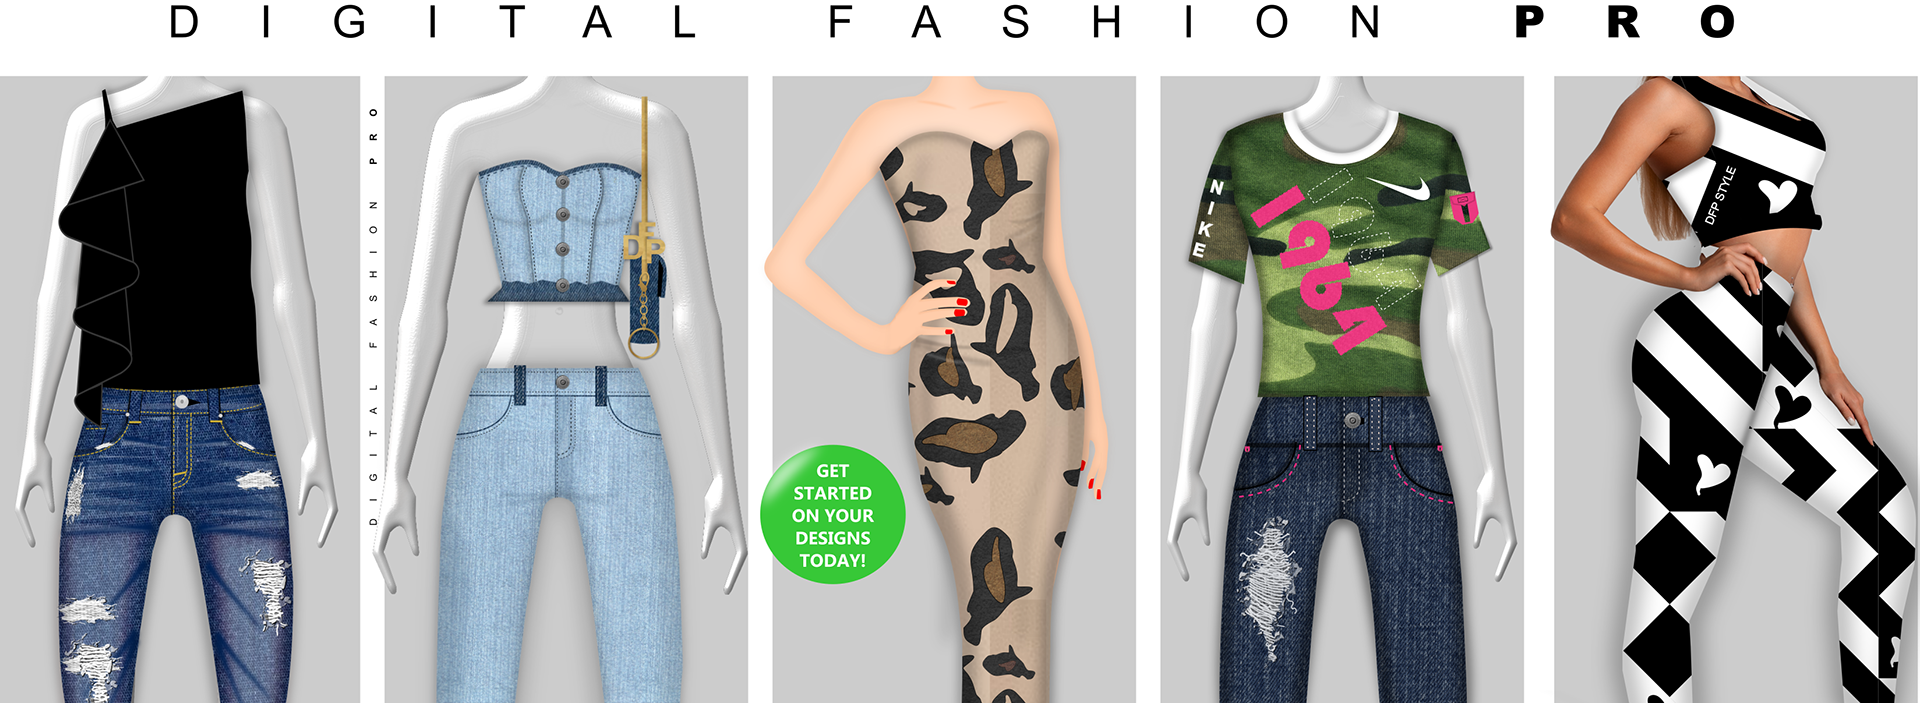 7 Great Fashion Design Starter Kits for Girls and Tweens